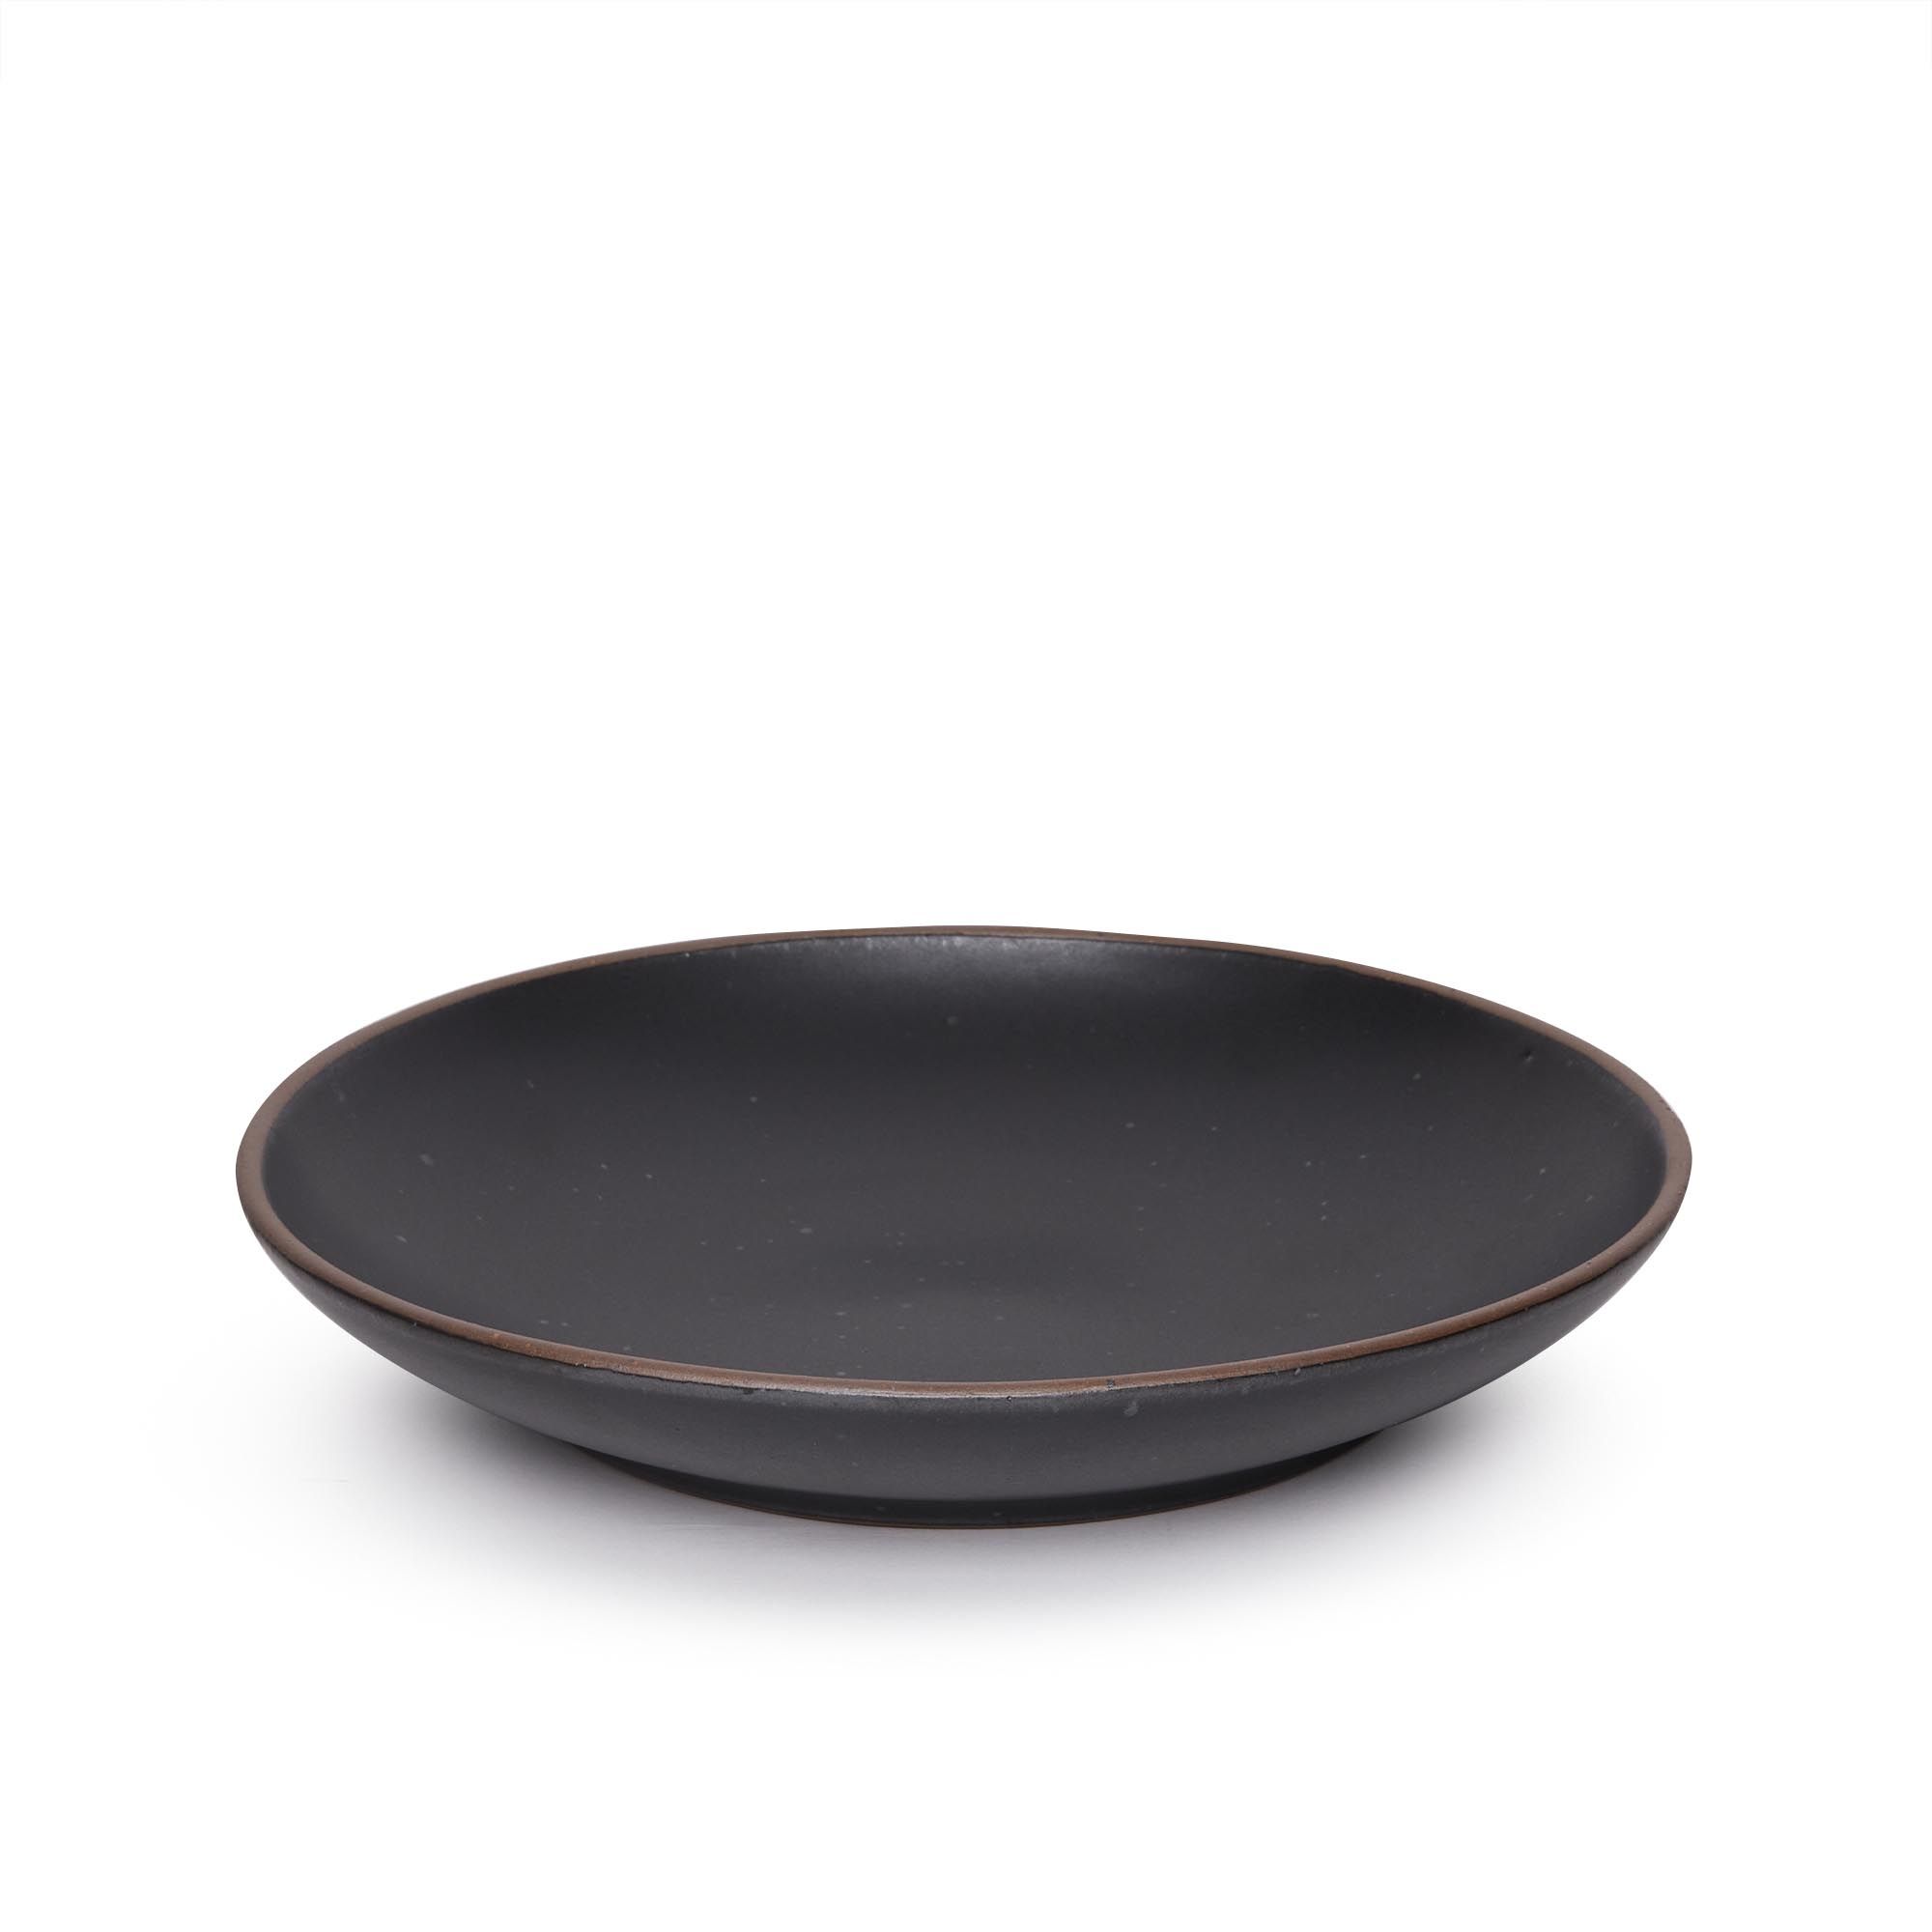 A large ceramic plate with a curved bowl edge in a graphite black color featuring iron speckles and an unglazed rim.